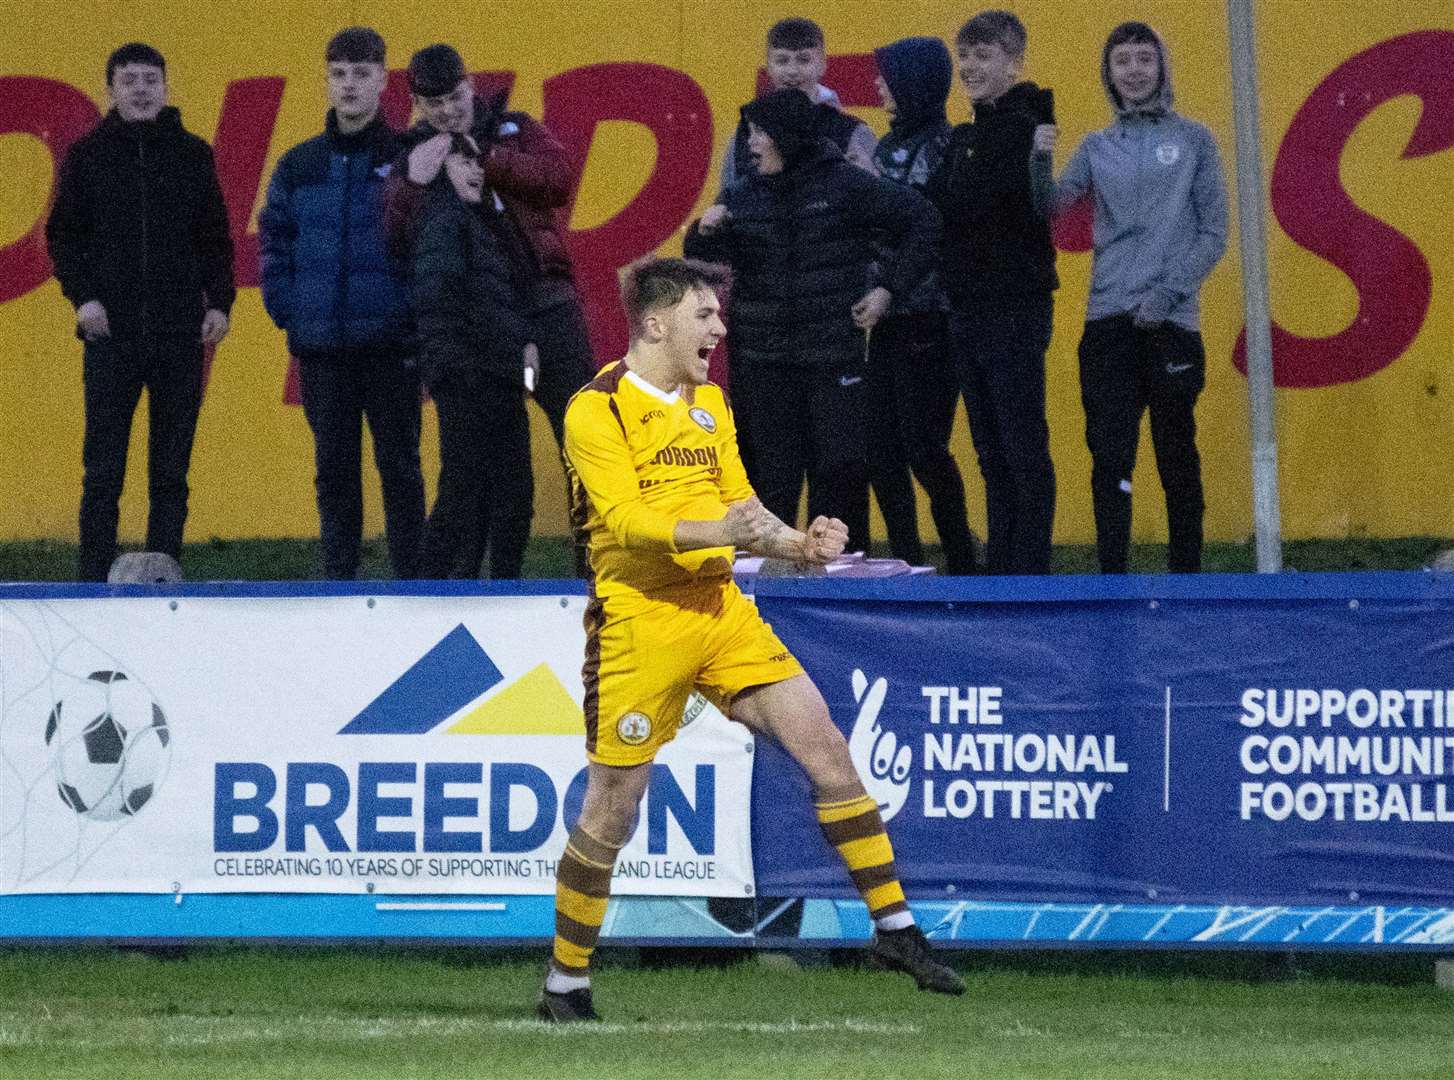 Forres Mechanics' Shaun Morrison celebrates his second half volley in front of the Cans young team...Forres Mechanics FC (8) vs Strathspey Thistle FC (1) - Highland Football League 22/23 - Mosset Park, Forres 07/01/23...Picture: Daniel Forsyth..